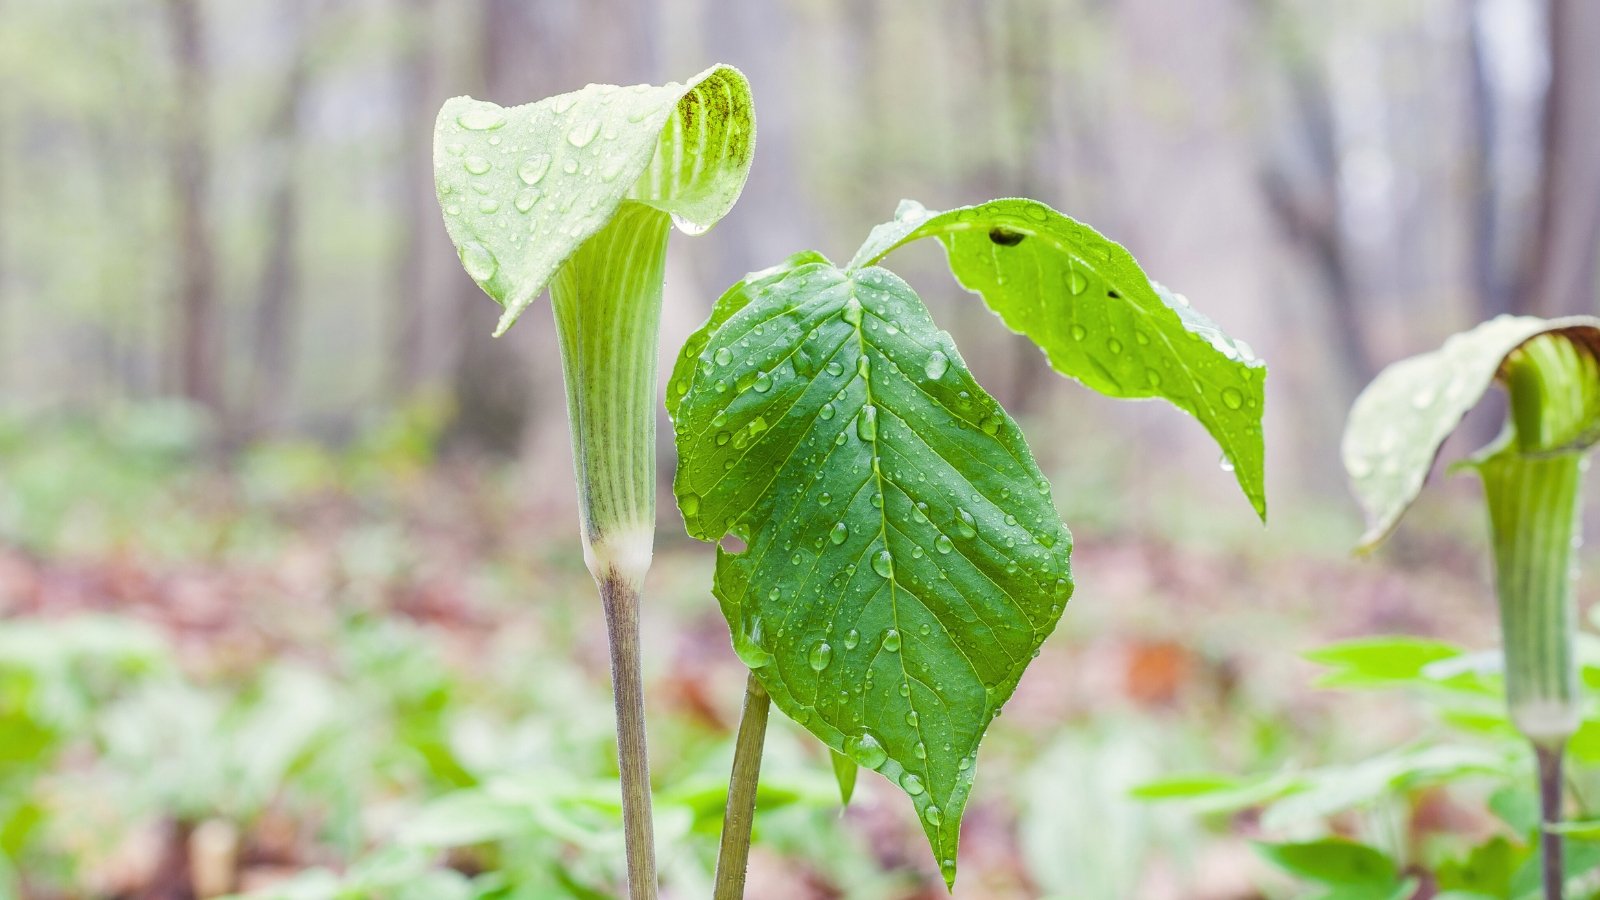 The Arisaema triphyllum plant is covered with raindrops in a forest garden, producing a striped, protective spathe that shelters a spadix and stands out among its large, trifoliate leaves.